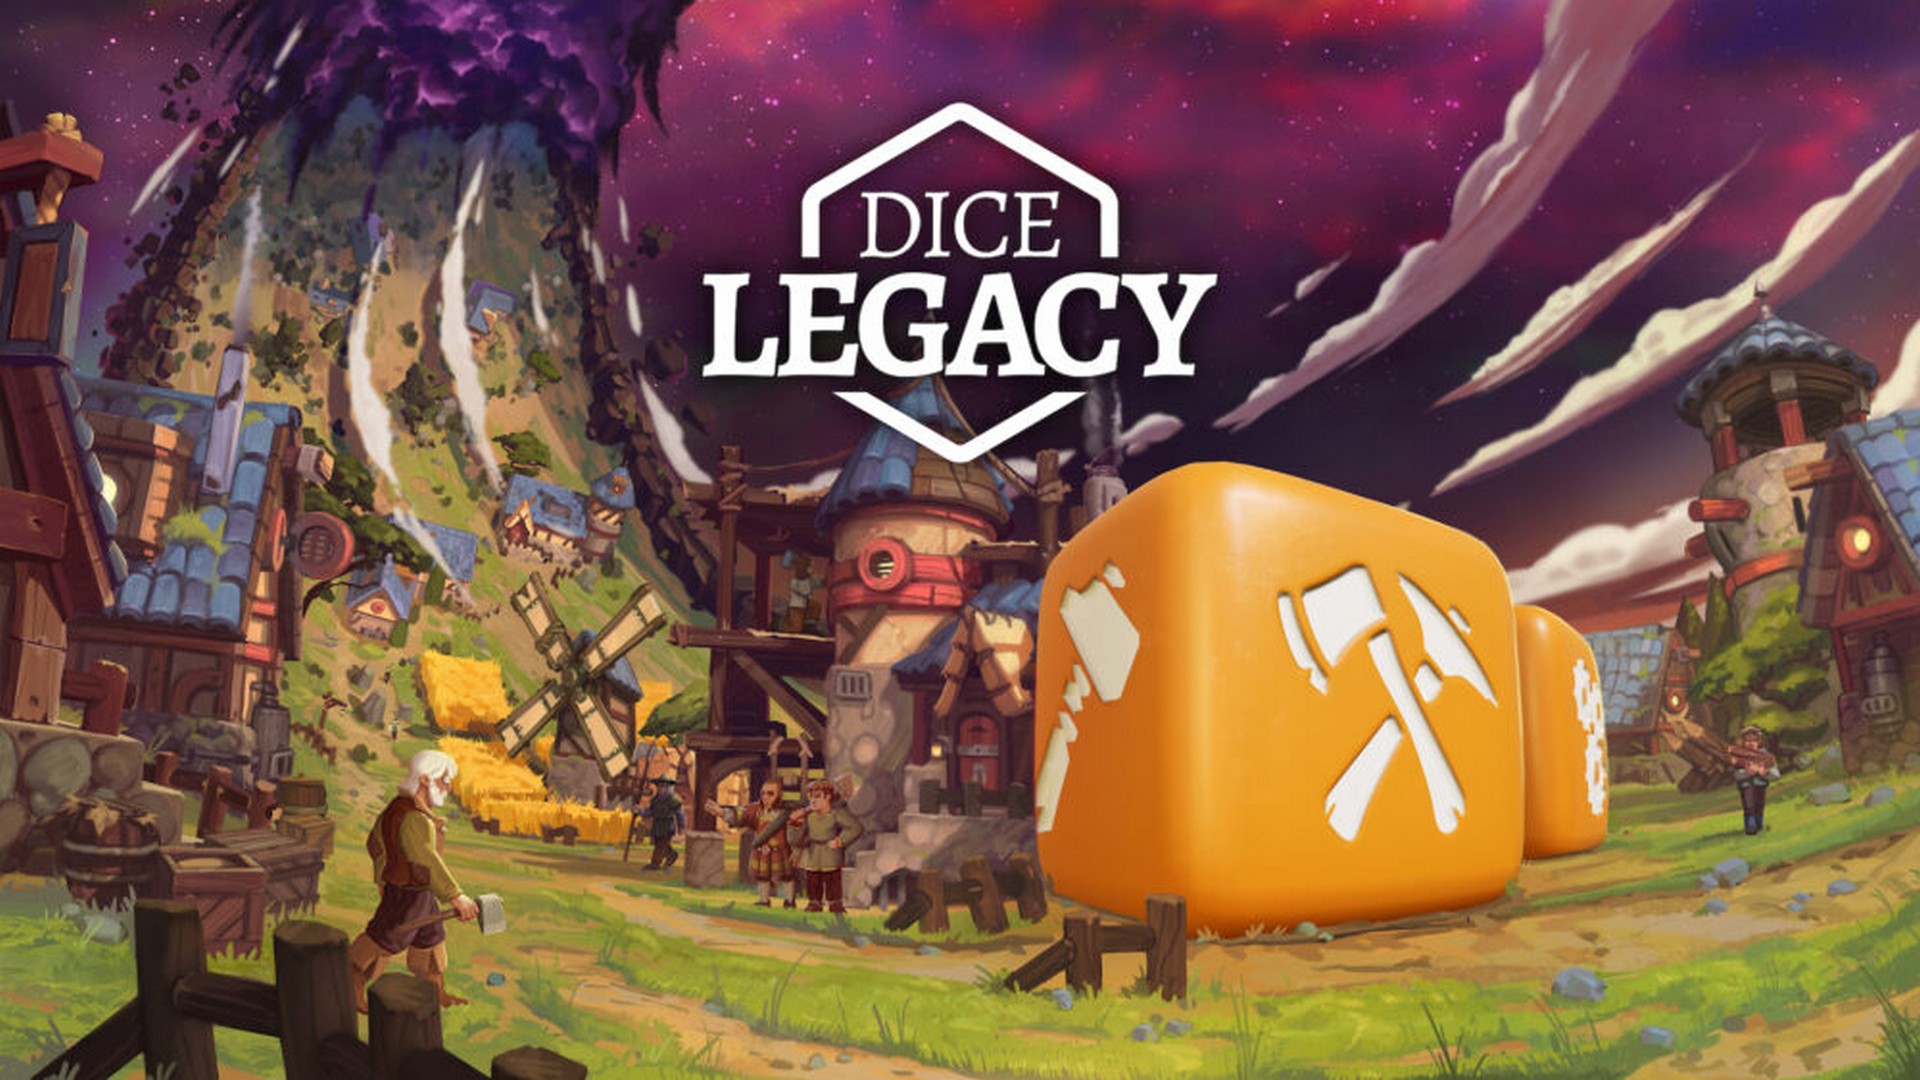 On A Roll: New Game Mode For Dice Legacy